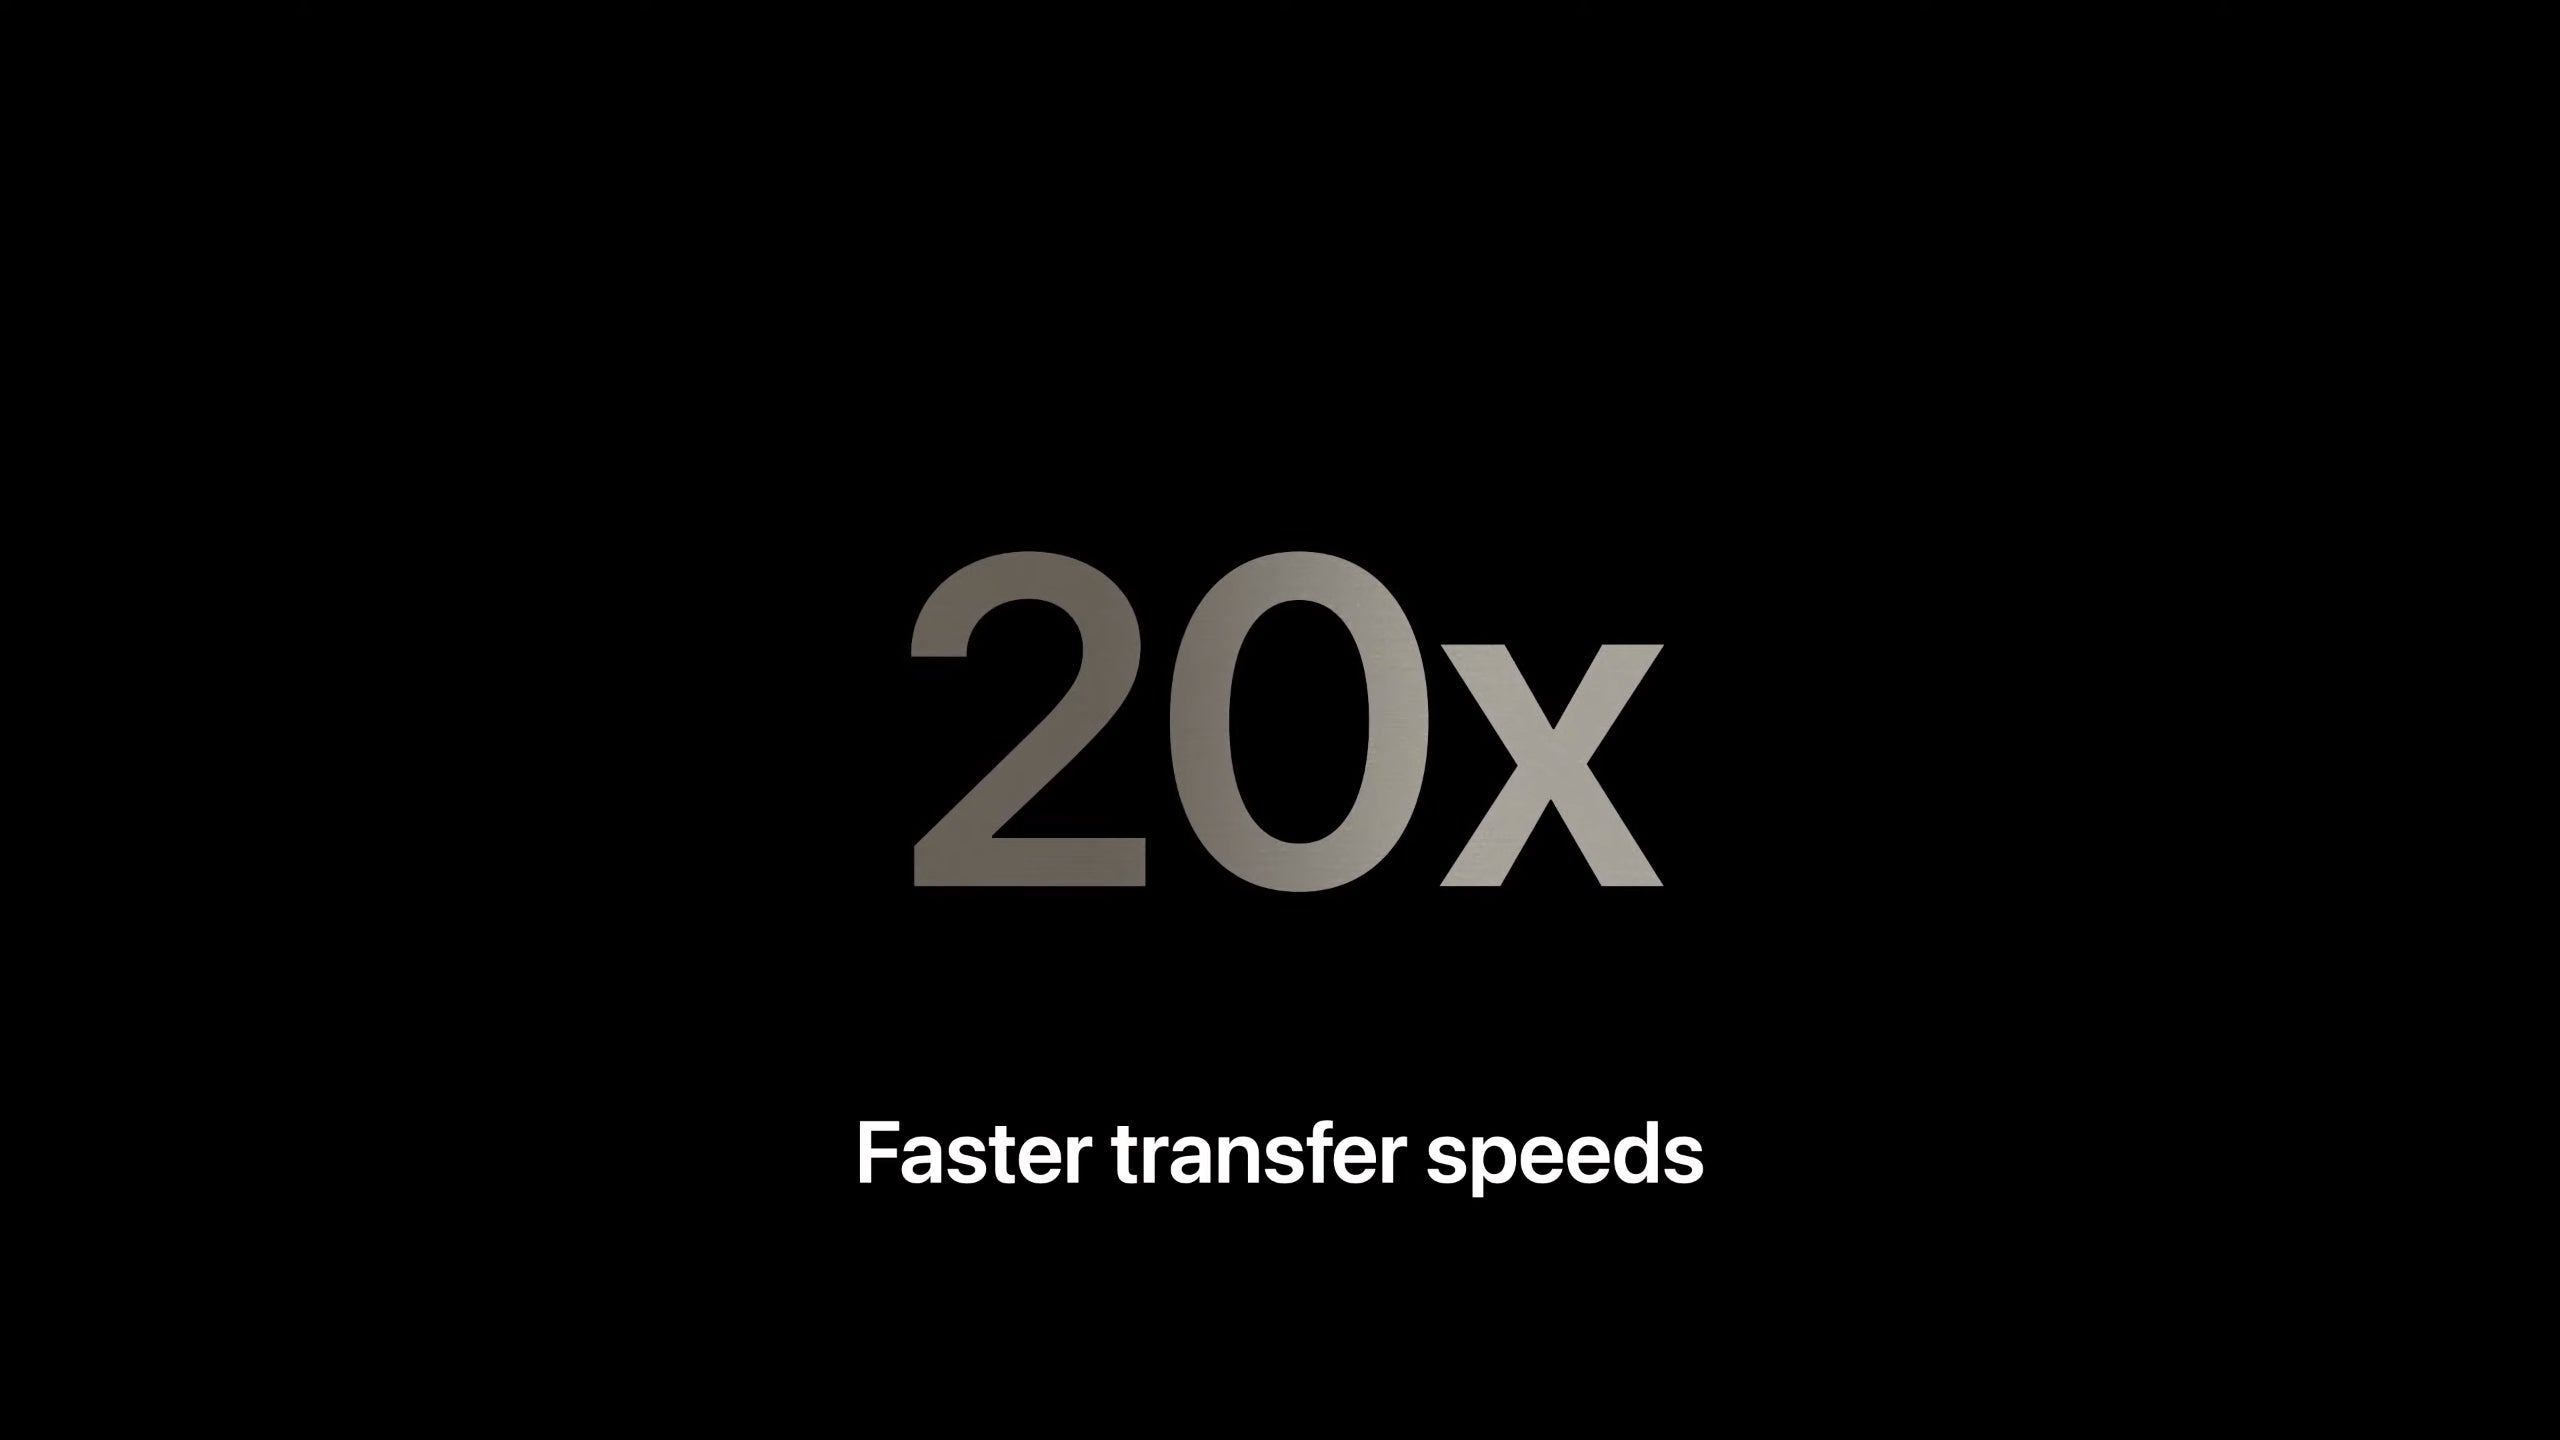 Apple clams up to 20 times faster transfer speeds on the iPhone 15 Pro and Pro Max - Apple's USB-C iPhone metamorphoses isn't the same standard on all phones and it wants to charge you for a superior cable